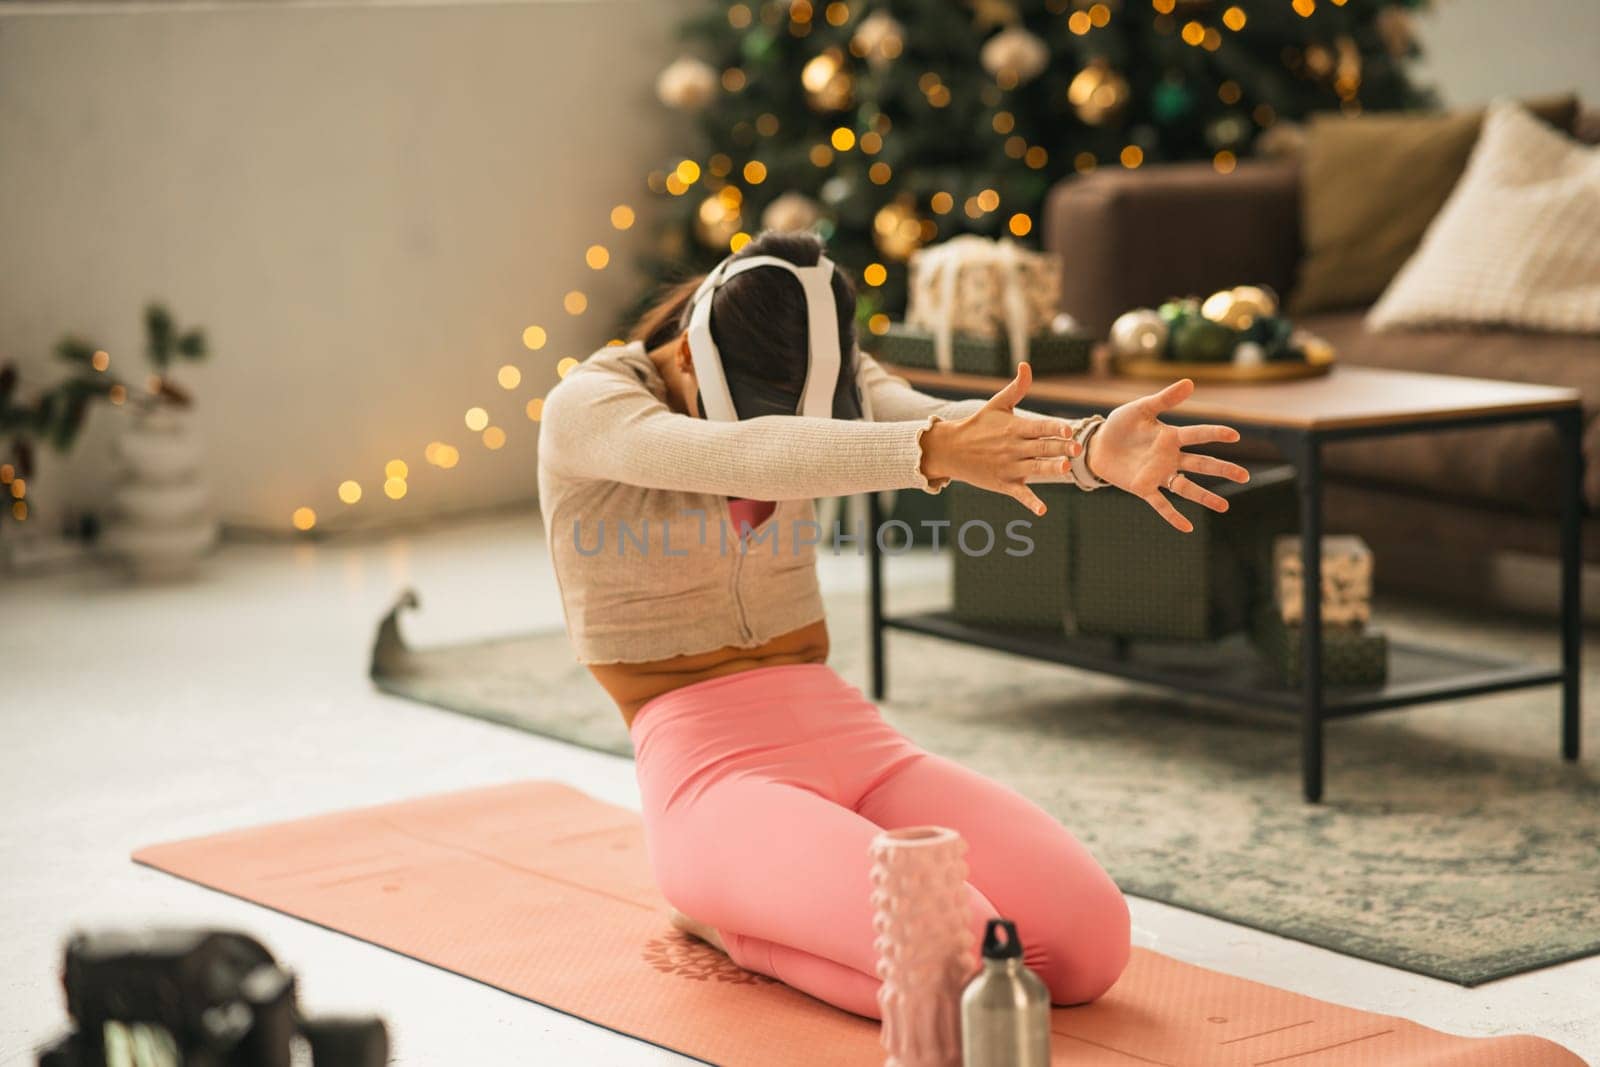 A fashionable young woman in sports attire, sporting a virtual reality headset, does yoga with a Christmas tree in the background. High quality photo